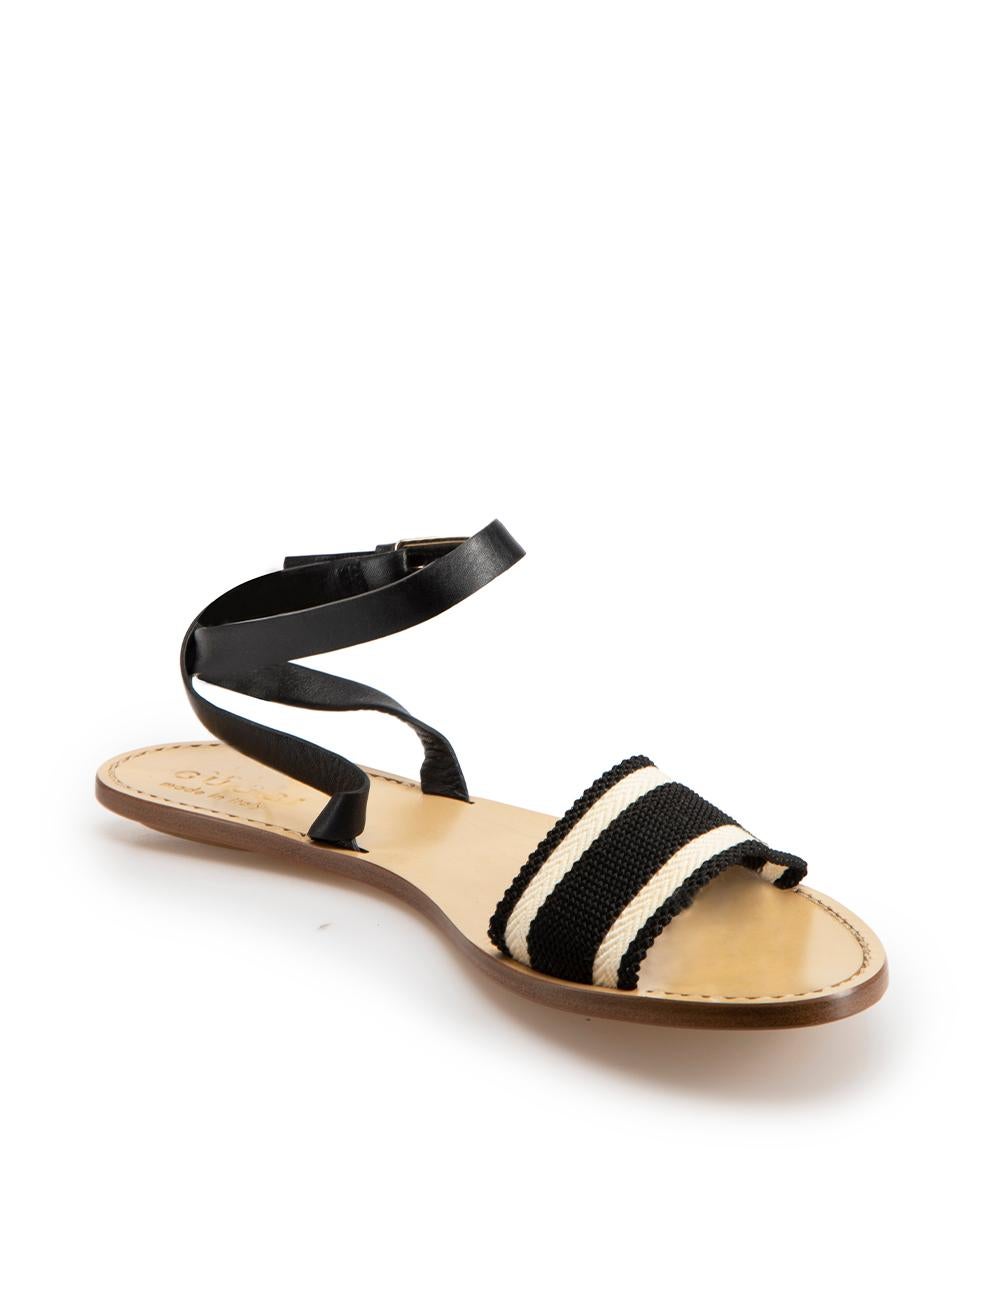 CONDITION is Very good. Minimal wear to sandals is evident. Minimal scratch marks to inner sole on this used Gucci designer resale item. Dustbag included.

Details


Black

Canvas

Flat strappy sandals

White striped pattern

Leather adjustable wrap